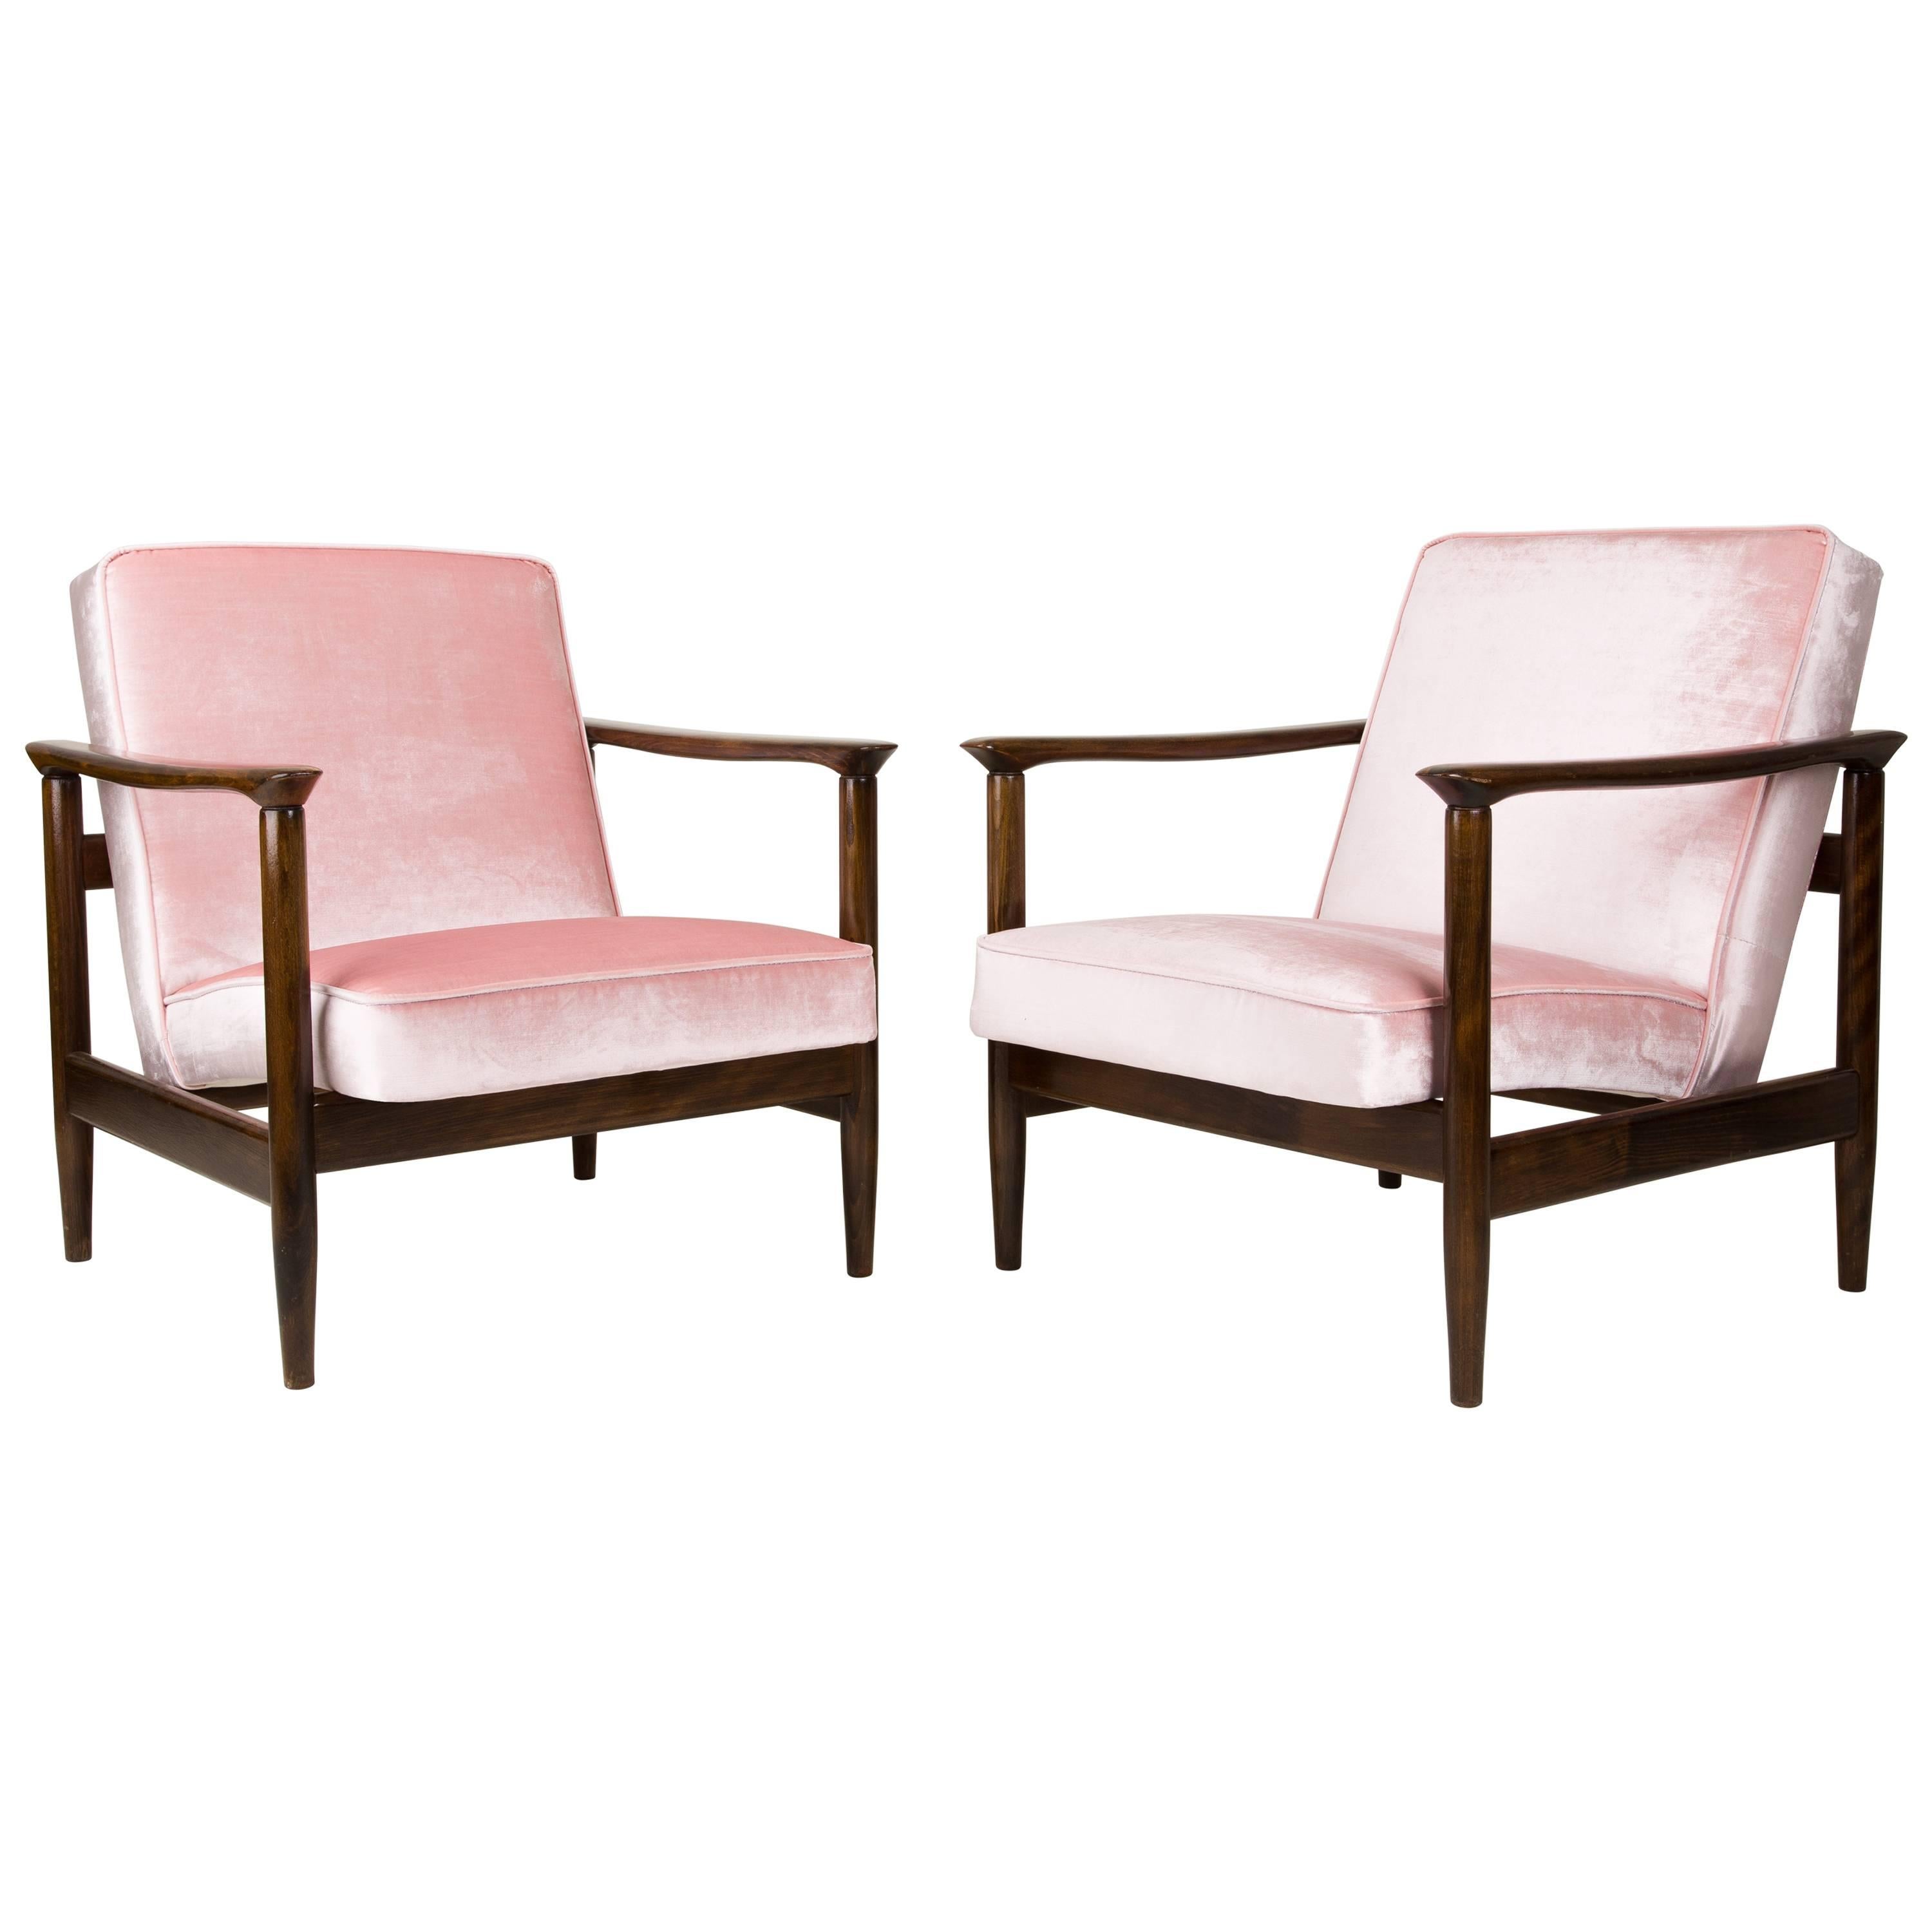 Pair of Baby Pink Velvet Armchairs, Designed by Edmund Homa, 1960s